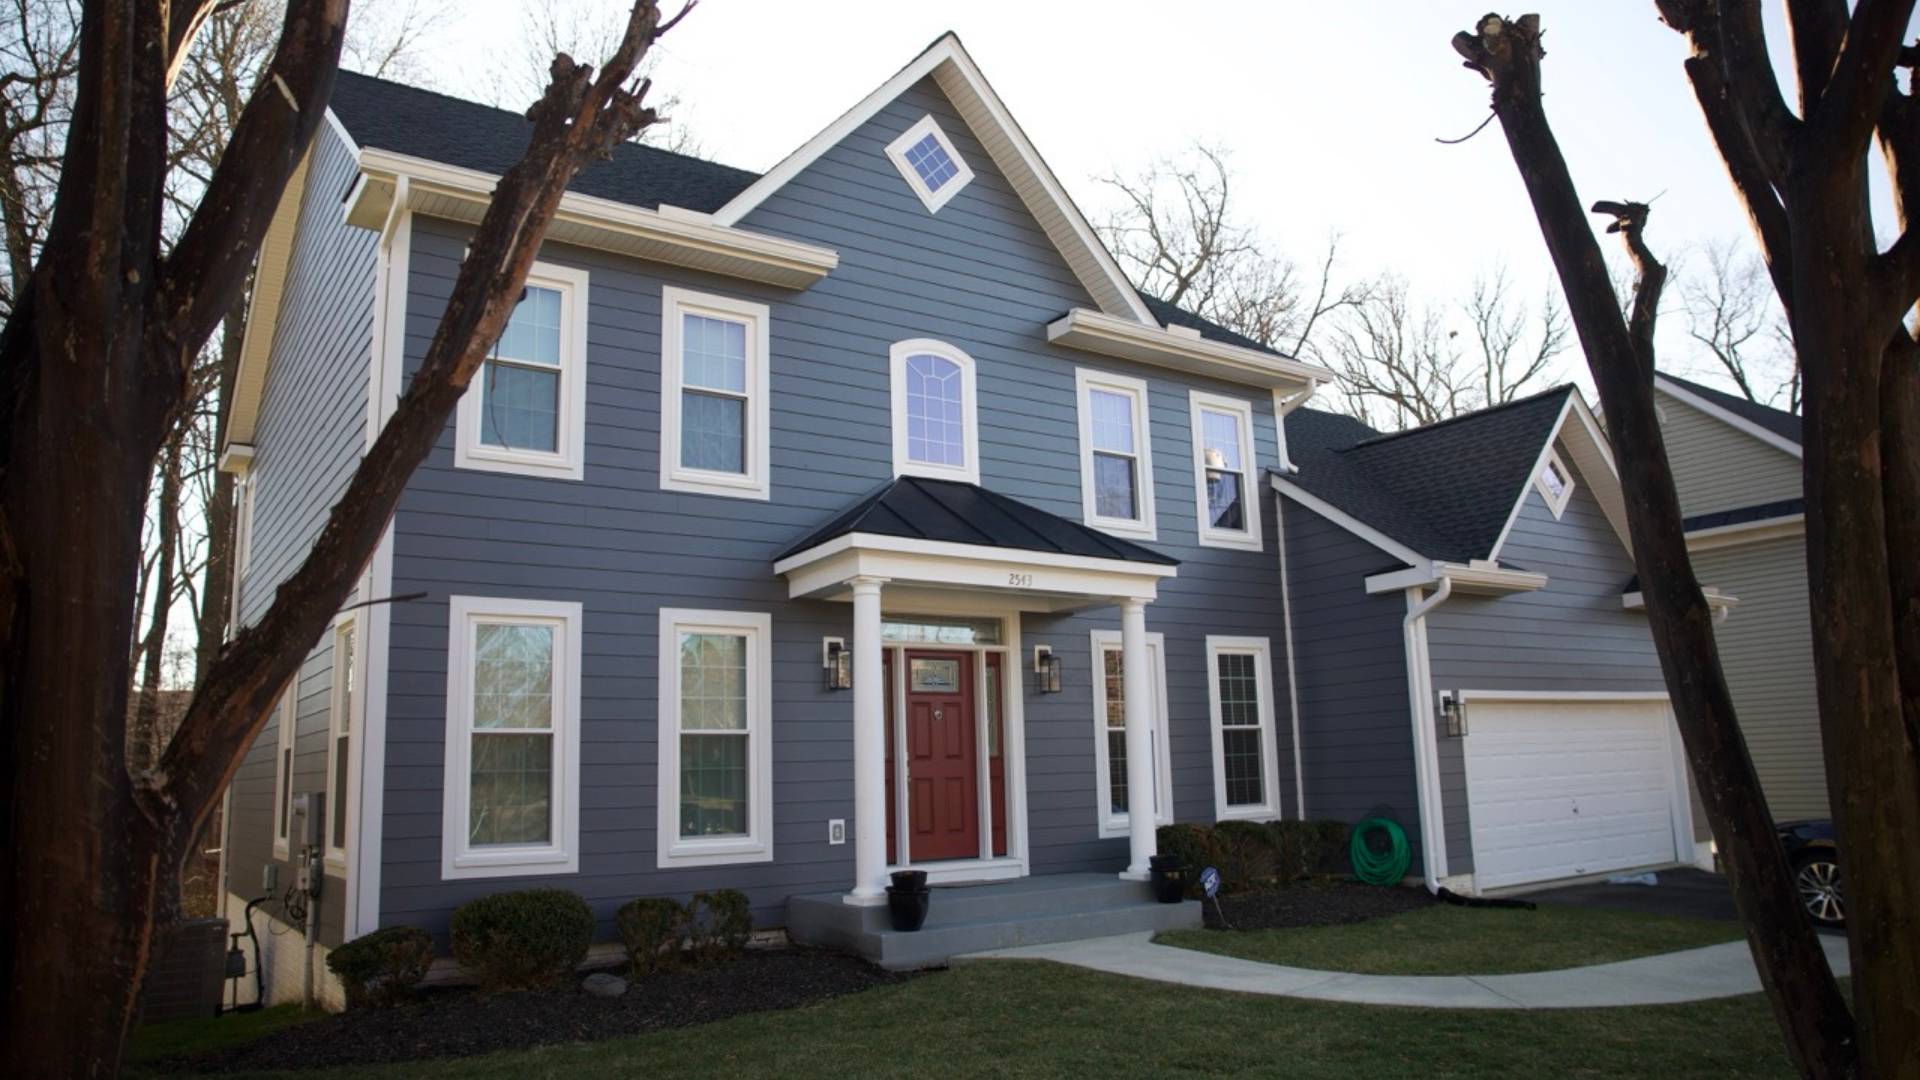 Home with Blue James Hardie Siding, new roof, gutters, and more